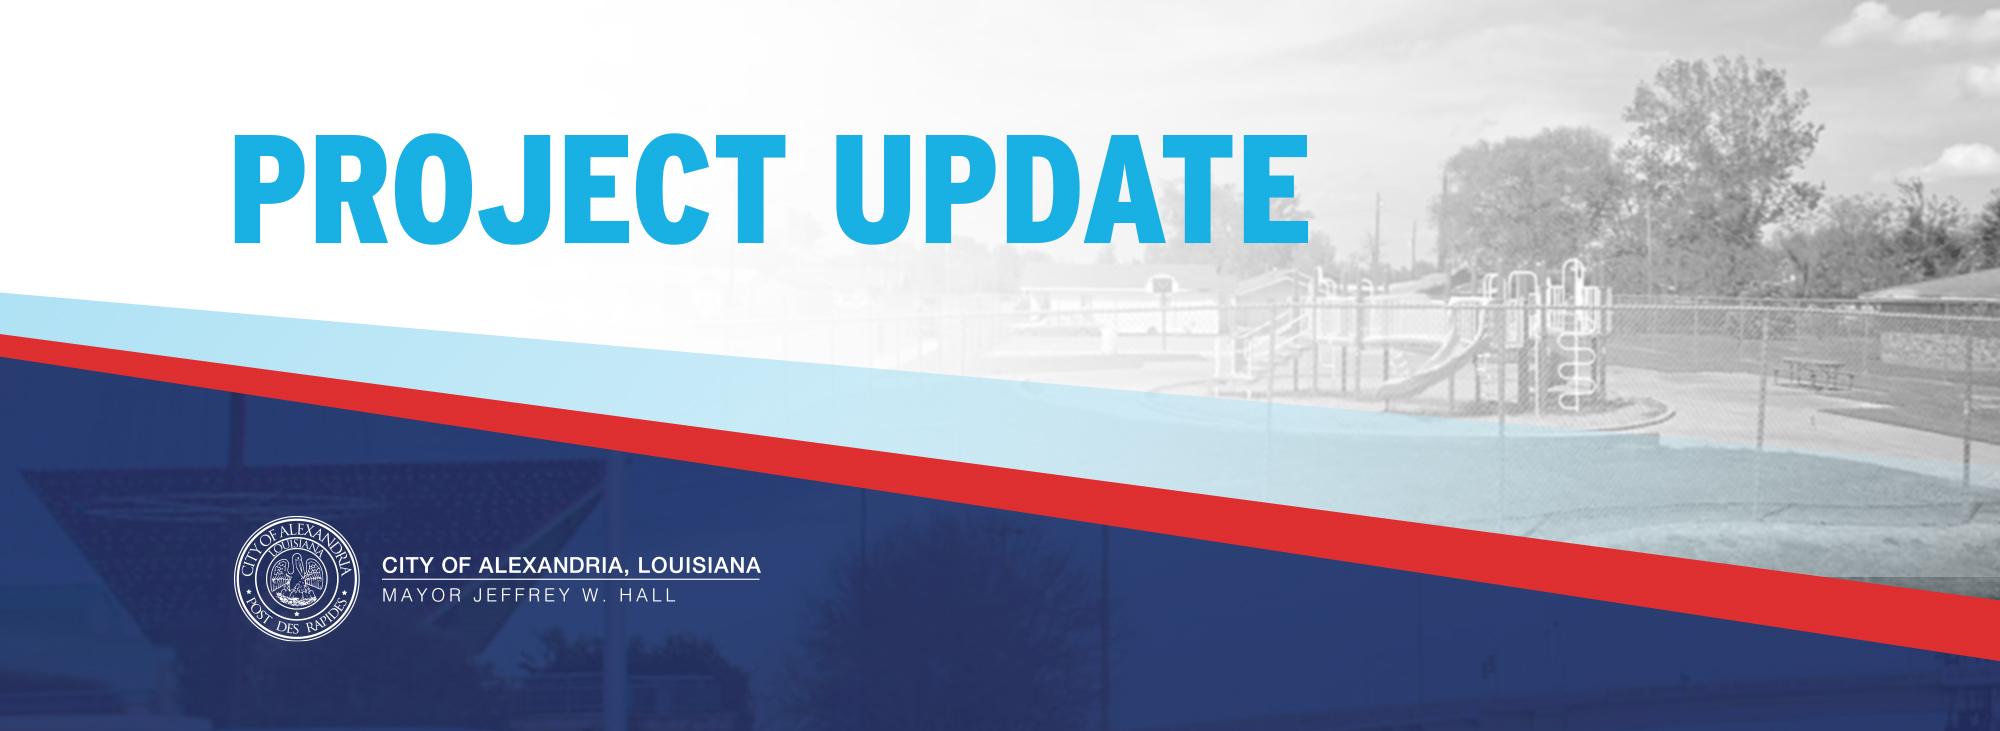 The City of Alexandria has provided a page for the public to be able to see what projects are under way and keep abreast of their progress throughout the process.